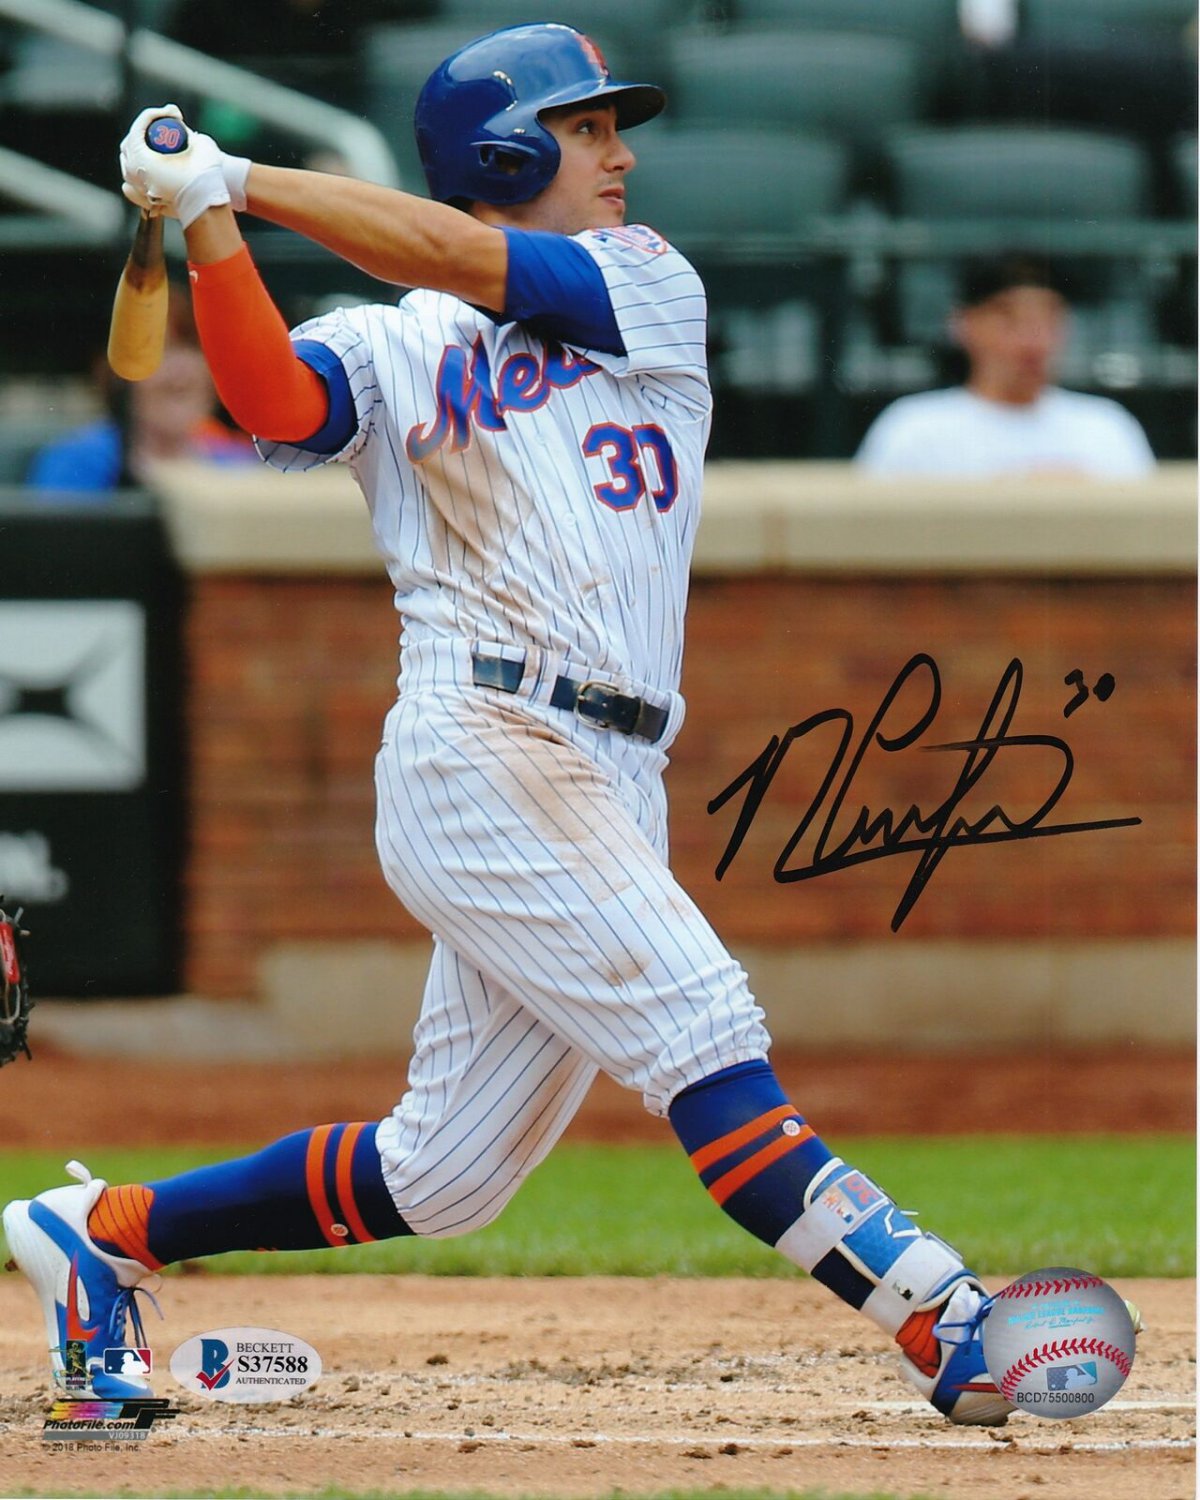 Michael Conforto Signed New York Mets 8x10 Blue Jersey Photo BAS